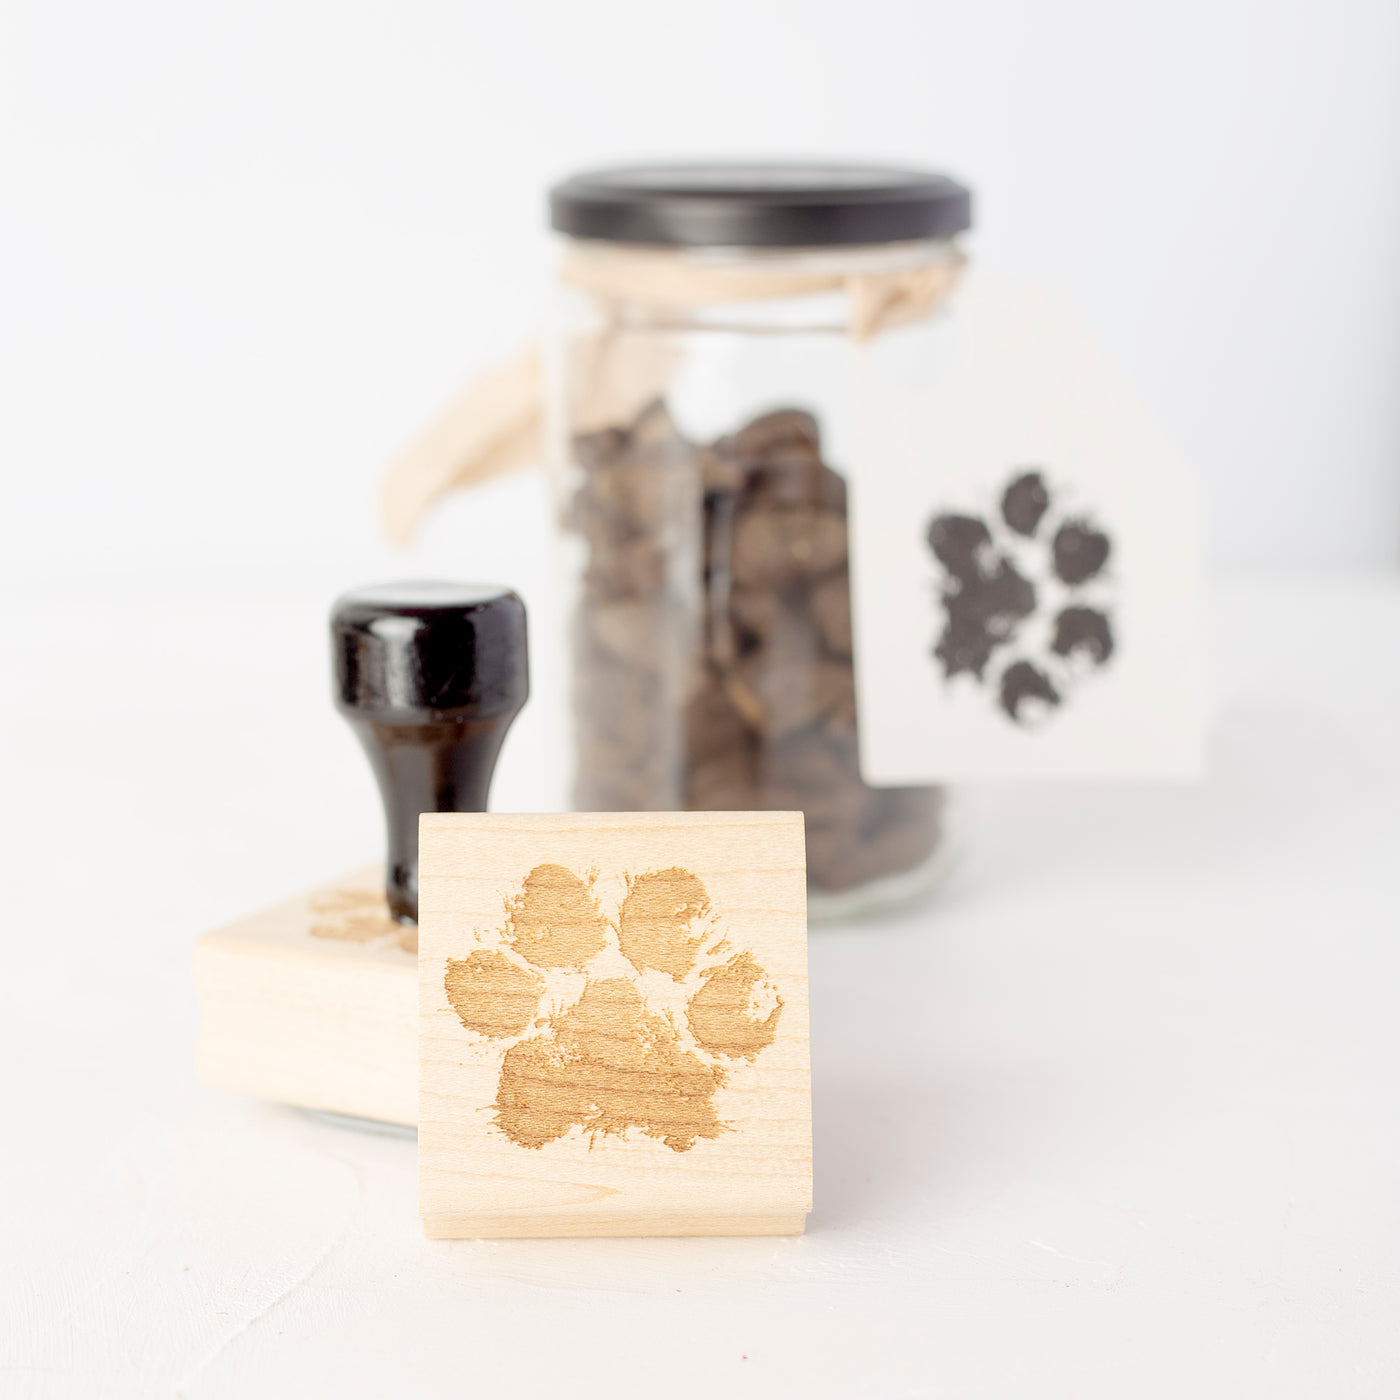 Dog treat jar decorated with customised paw print stamp with wooden handle